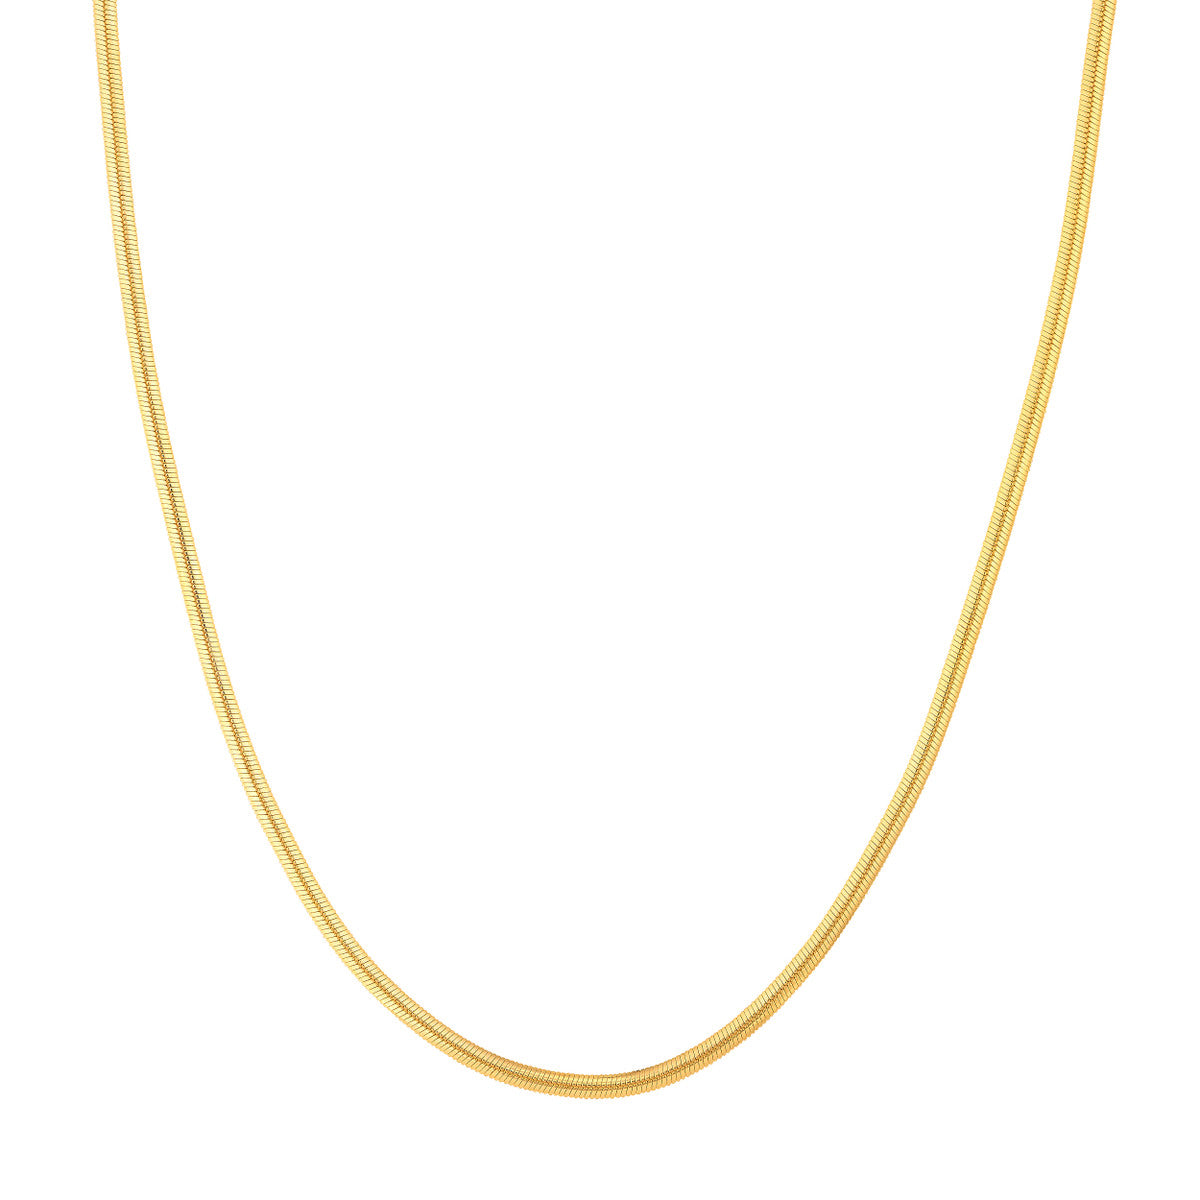 14K Gold 3.2mm Oval Snake Chain Necklace with Lobster Lock